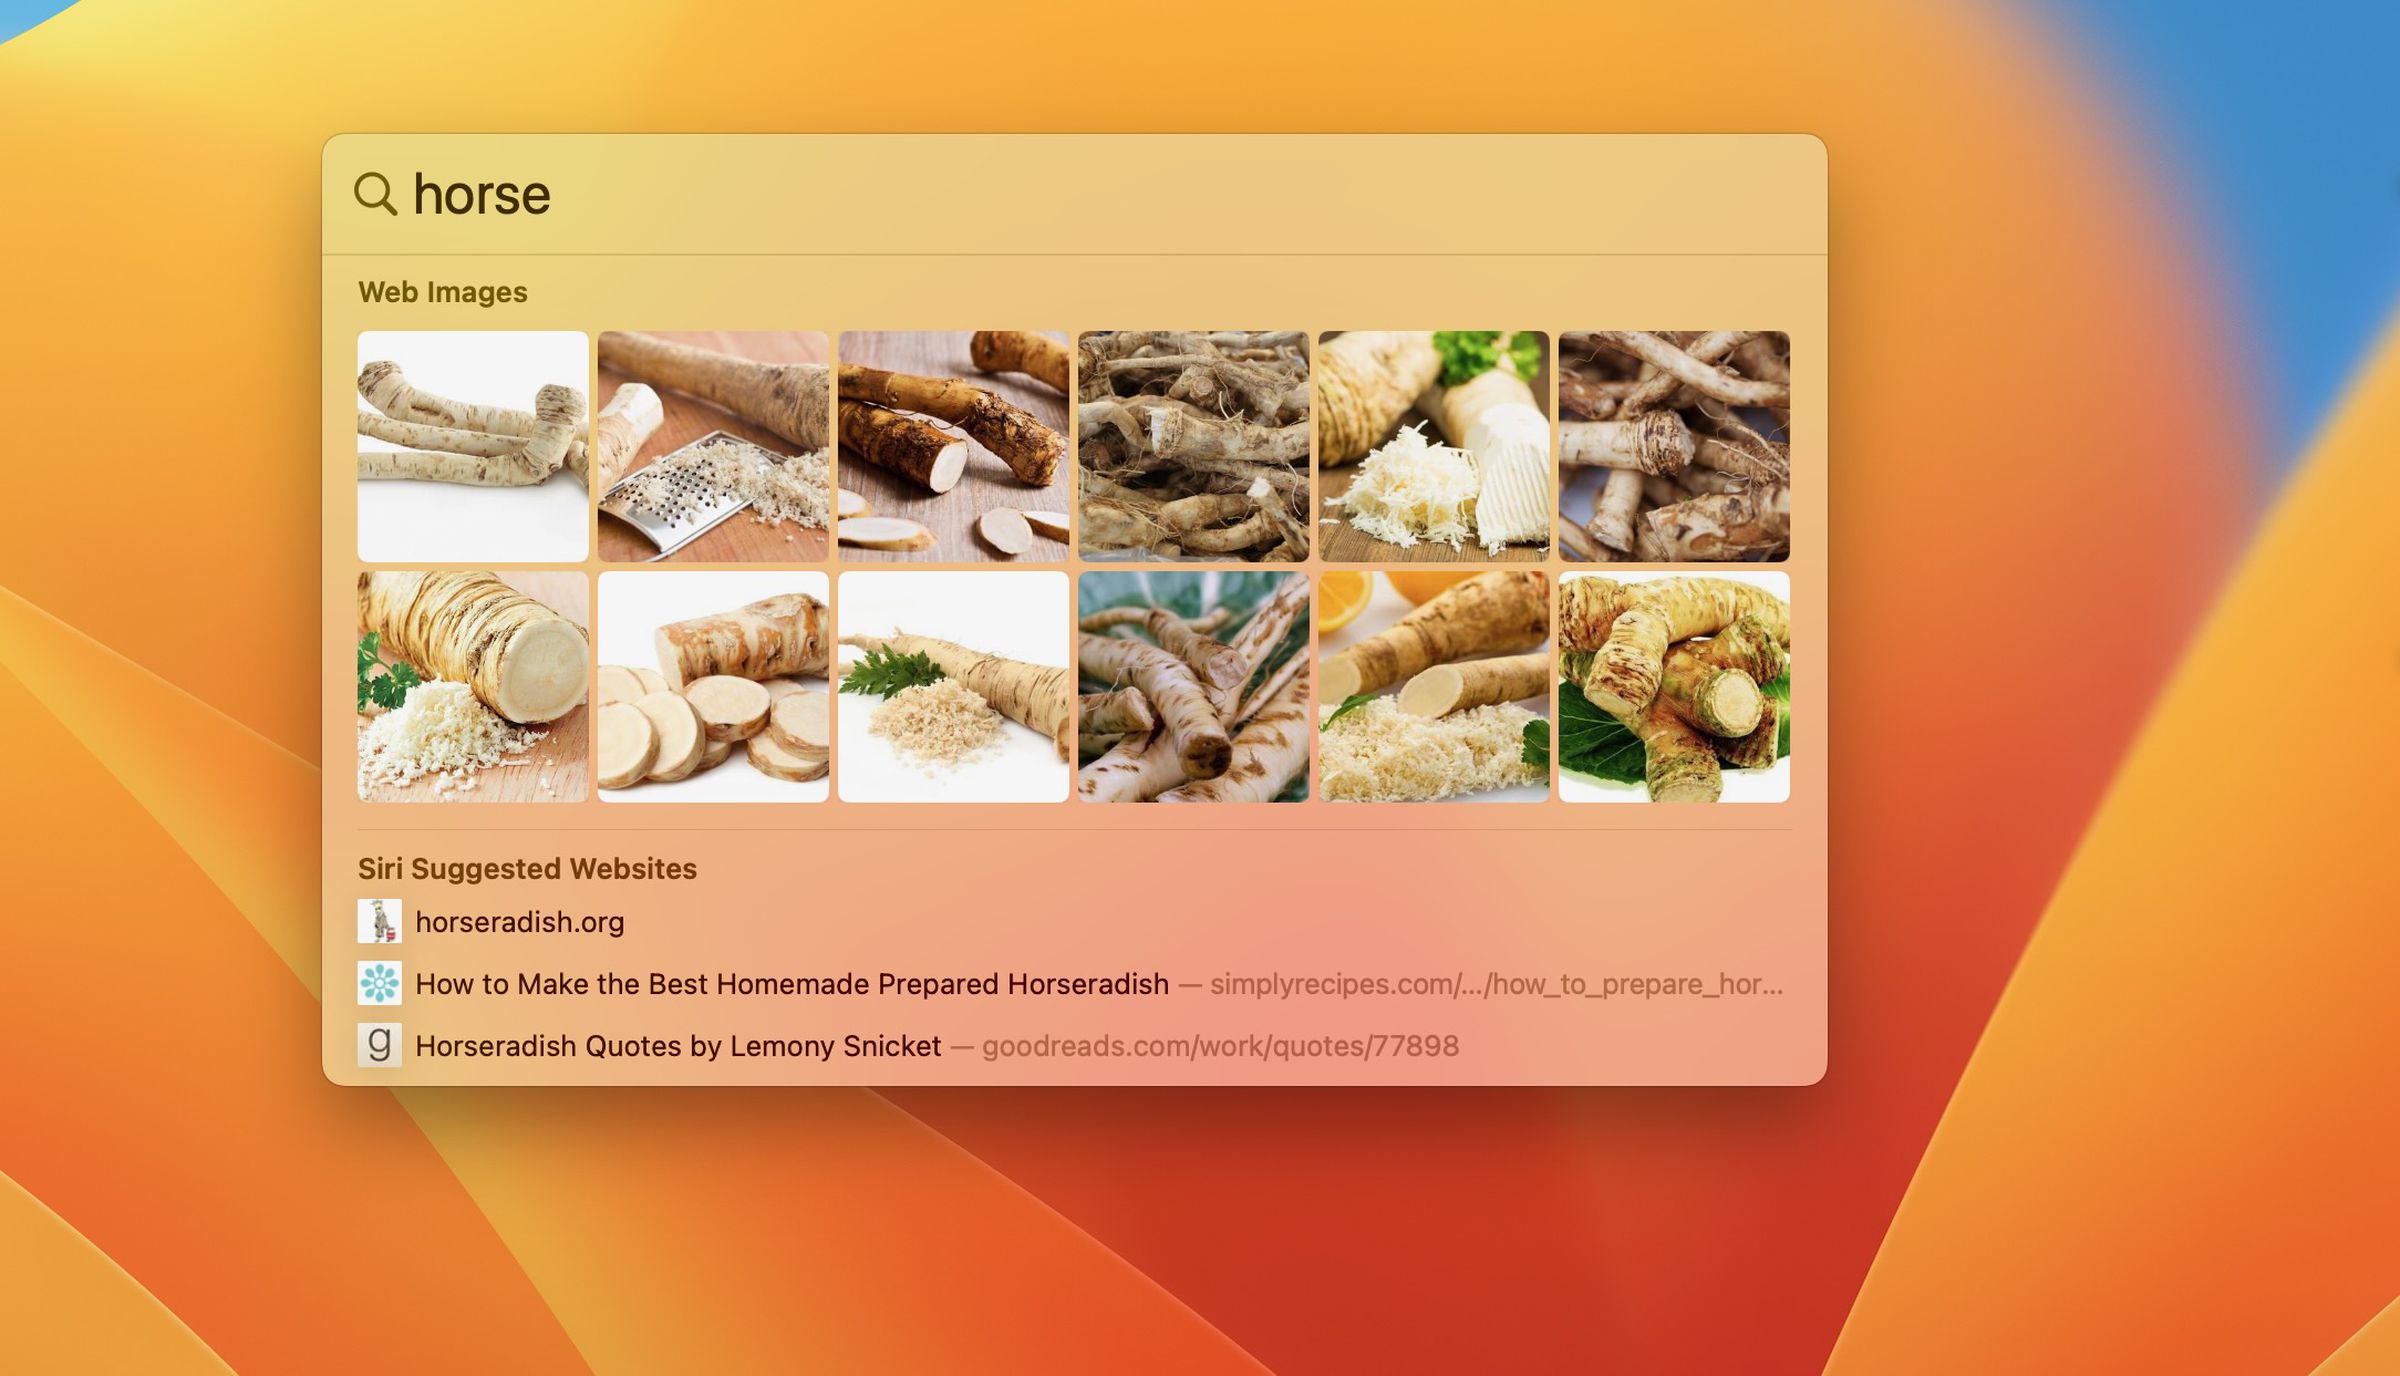 A screenshot of Spotlight in macOS Ventura with “horse” written in the search field. The Web Images results are a grid of horseradish pictures. The Siri Suggested Websites include horseradish.org, How To Make the Best Homemade Prepared Horseradish, and Horseradish Quotes by Lemony Snicket.